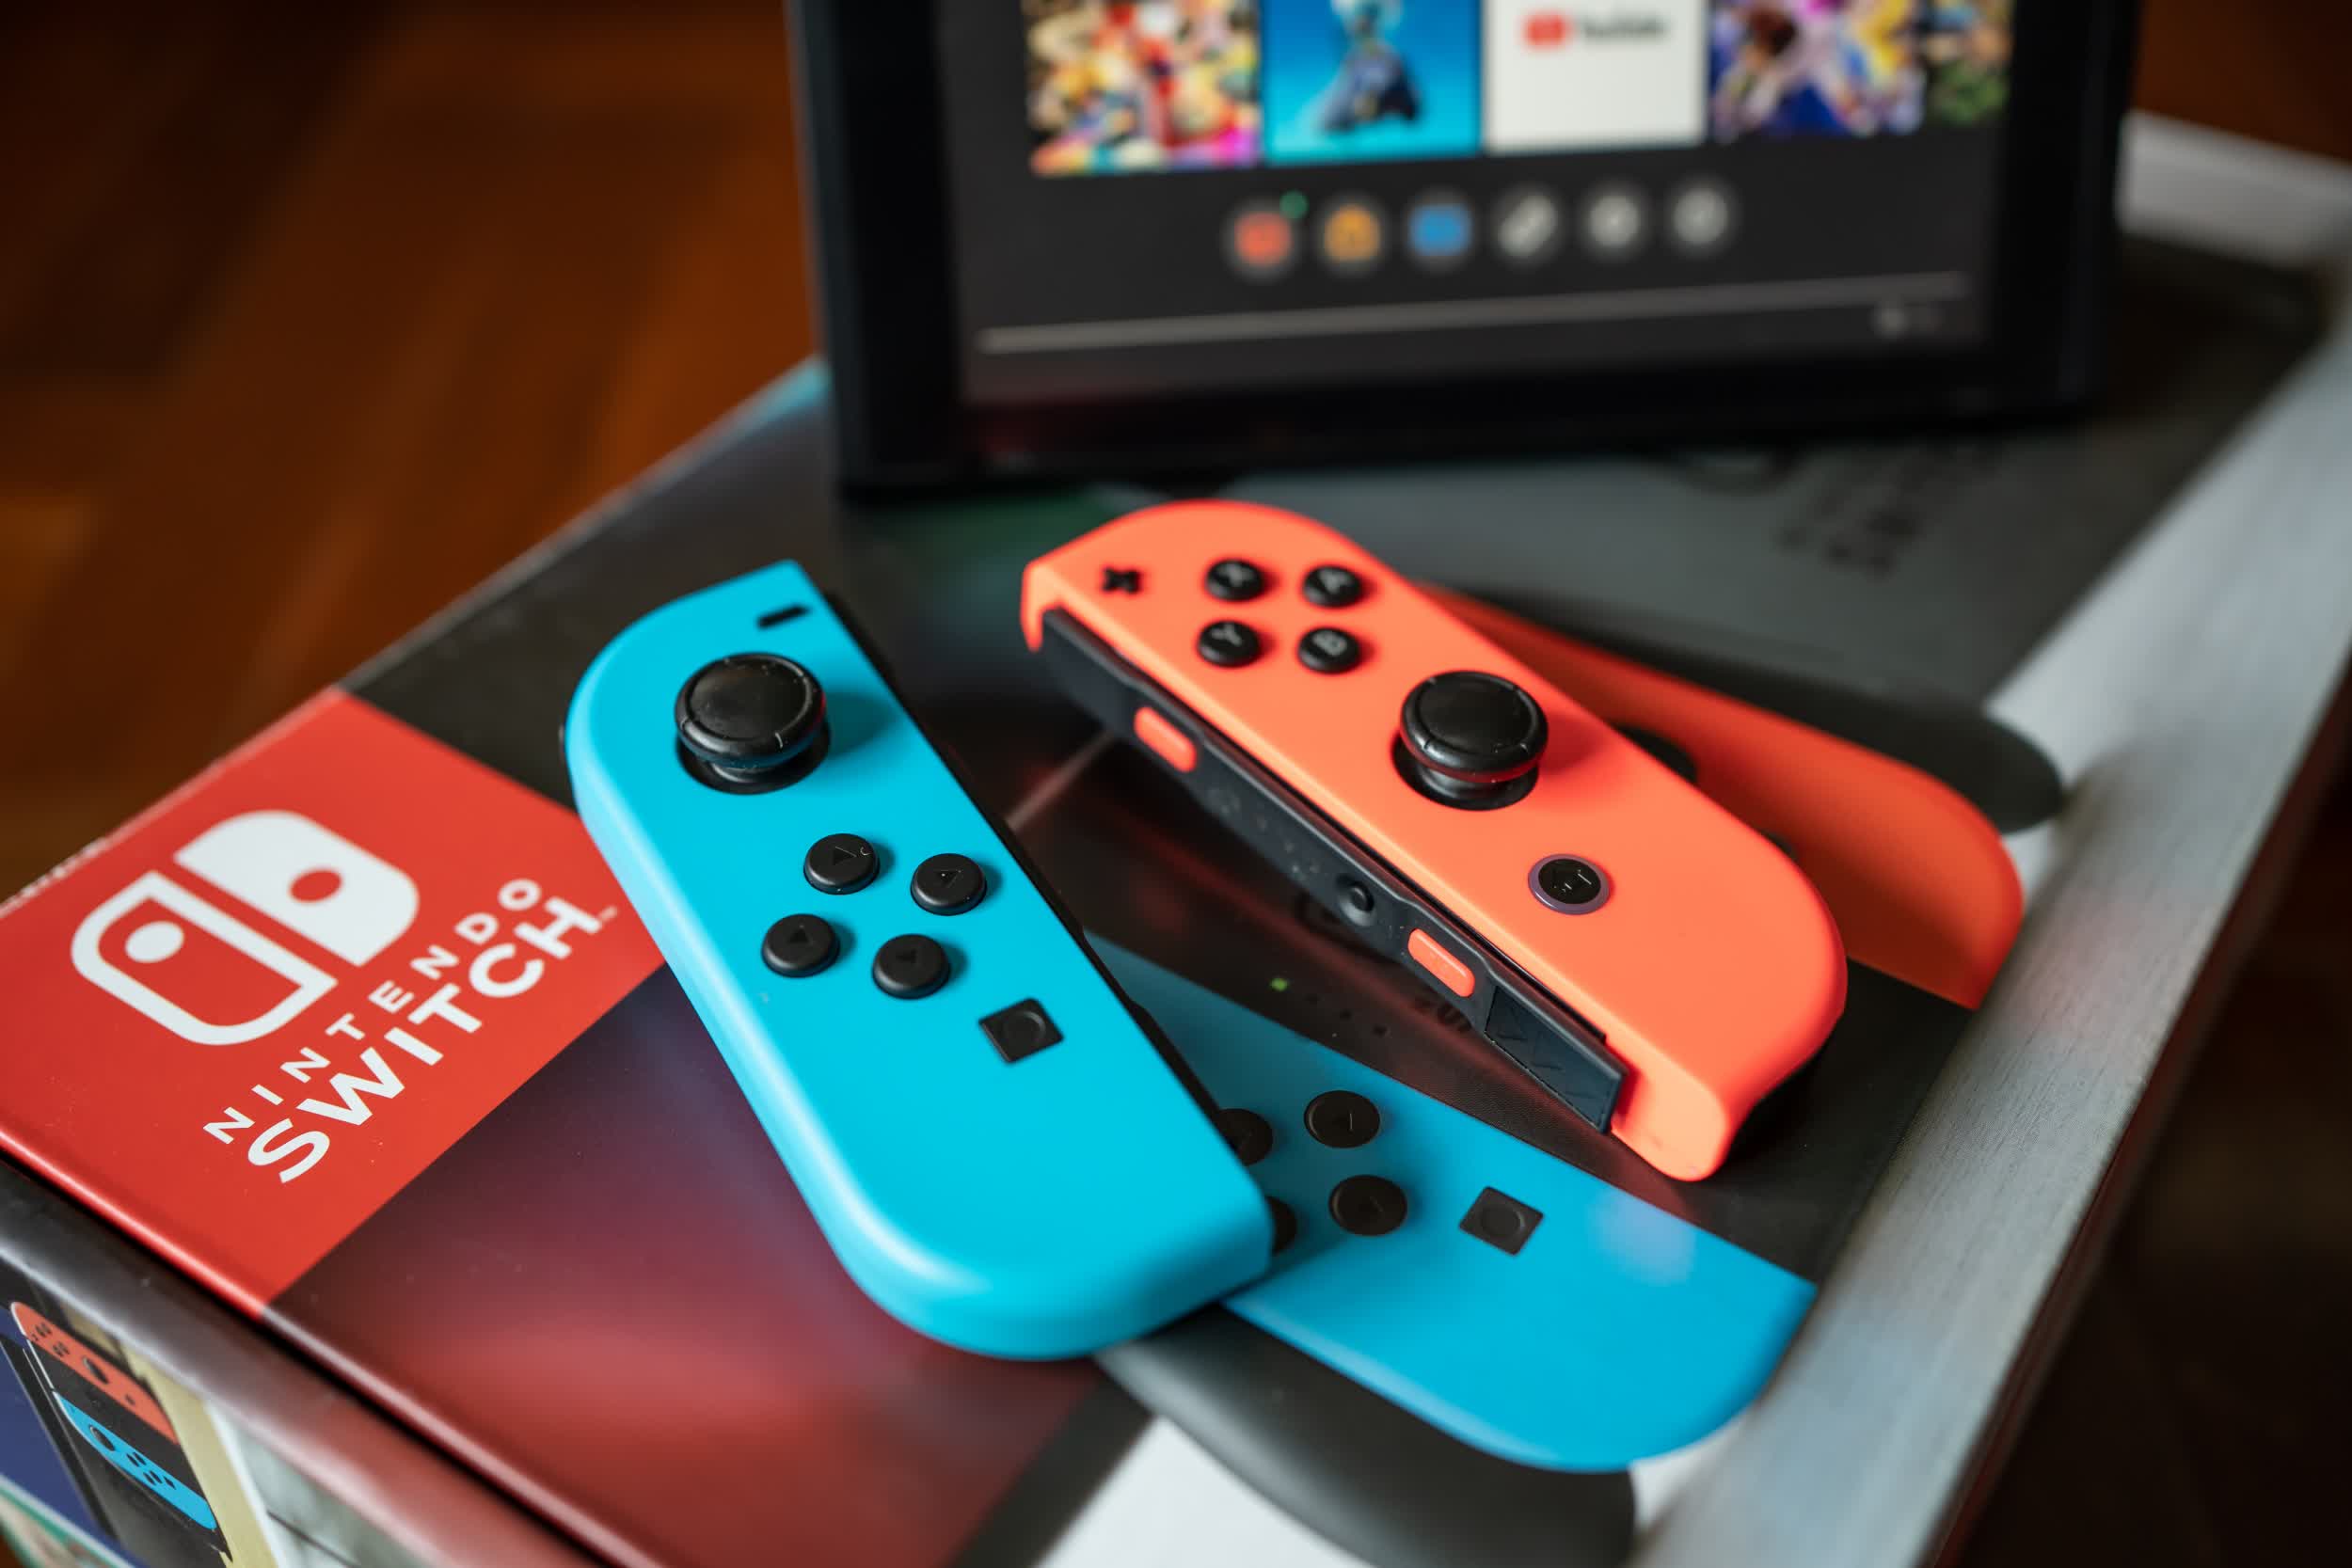 Upcoming iOS 16 supports Nintendo Switch controller and Joy-Cons